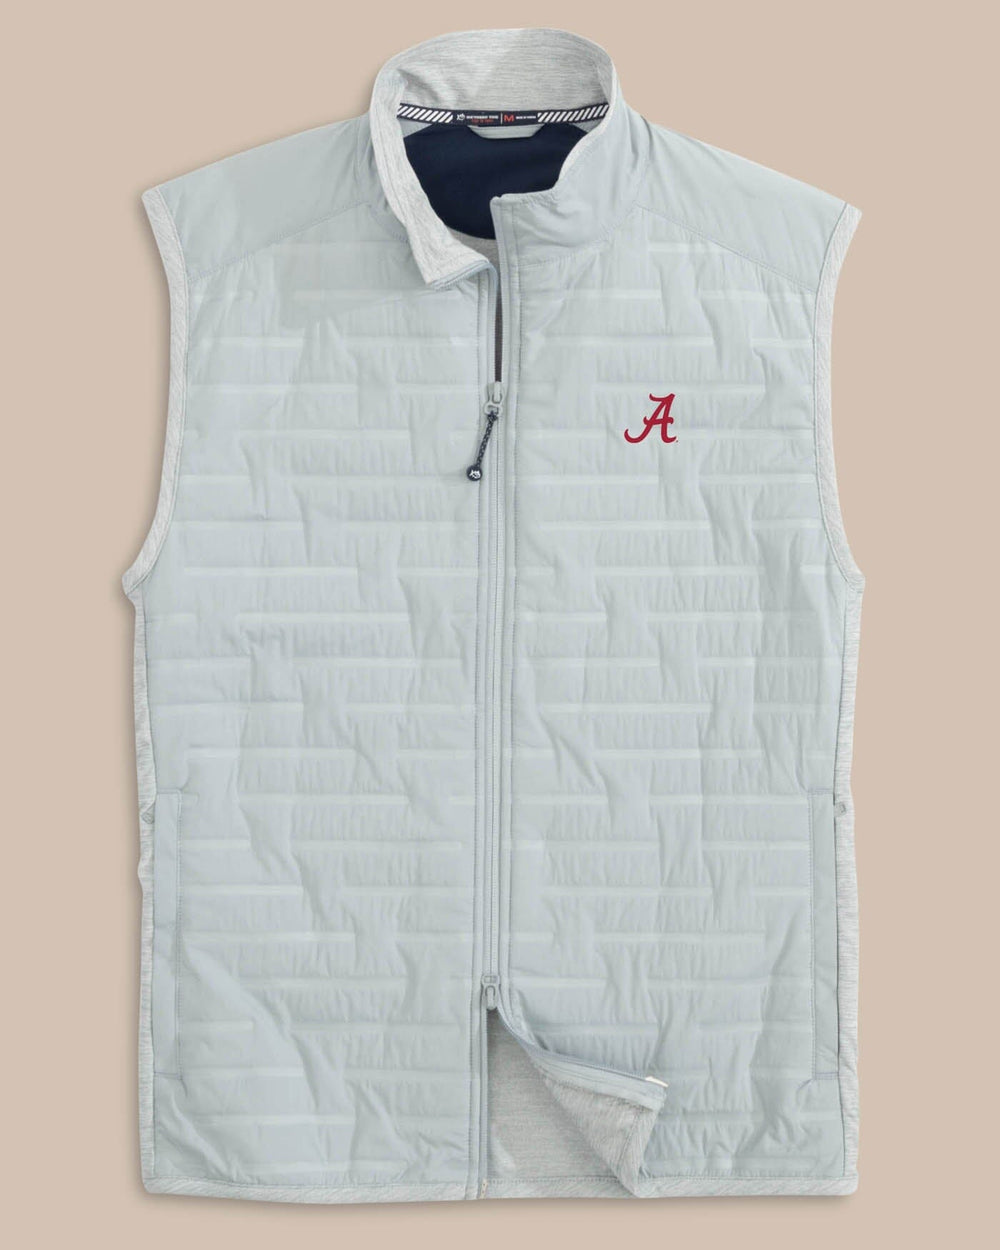 The front view of the Southern Tide Alabama Crimson Tide Abercorn Vest by Southern Tide - Gravel Grey